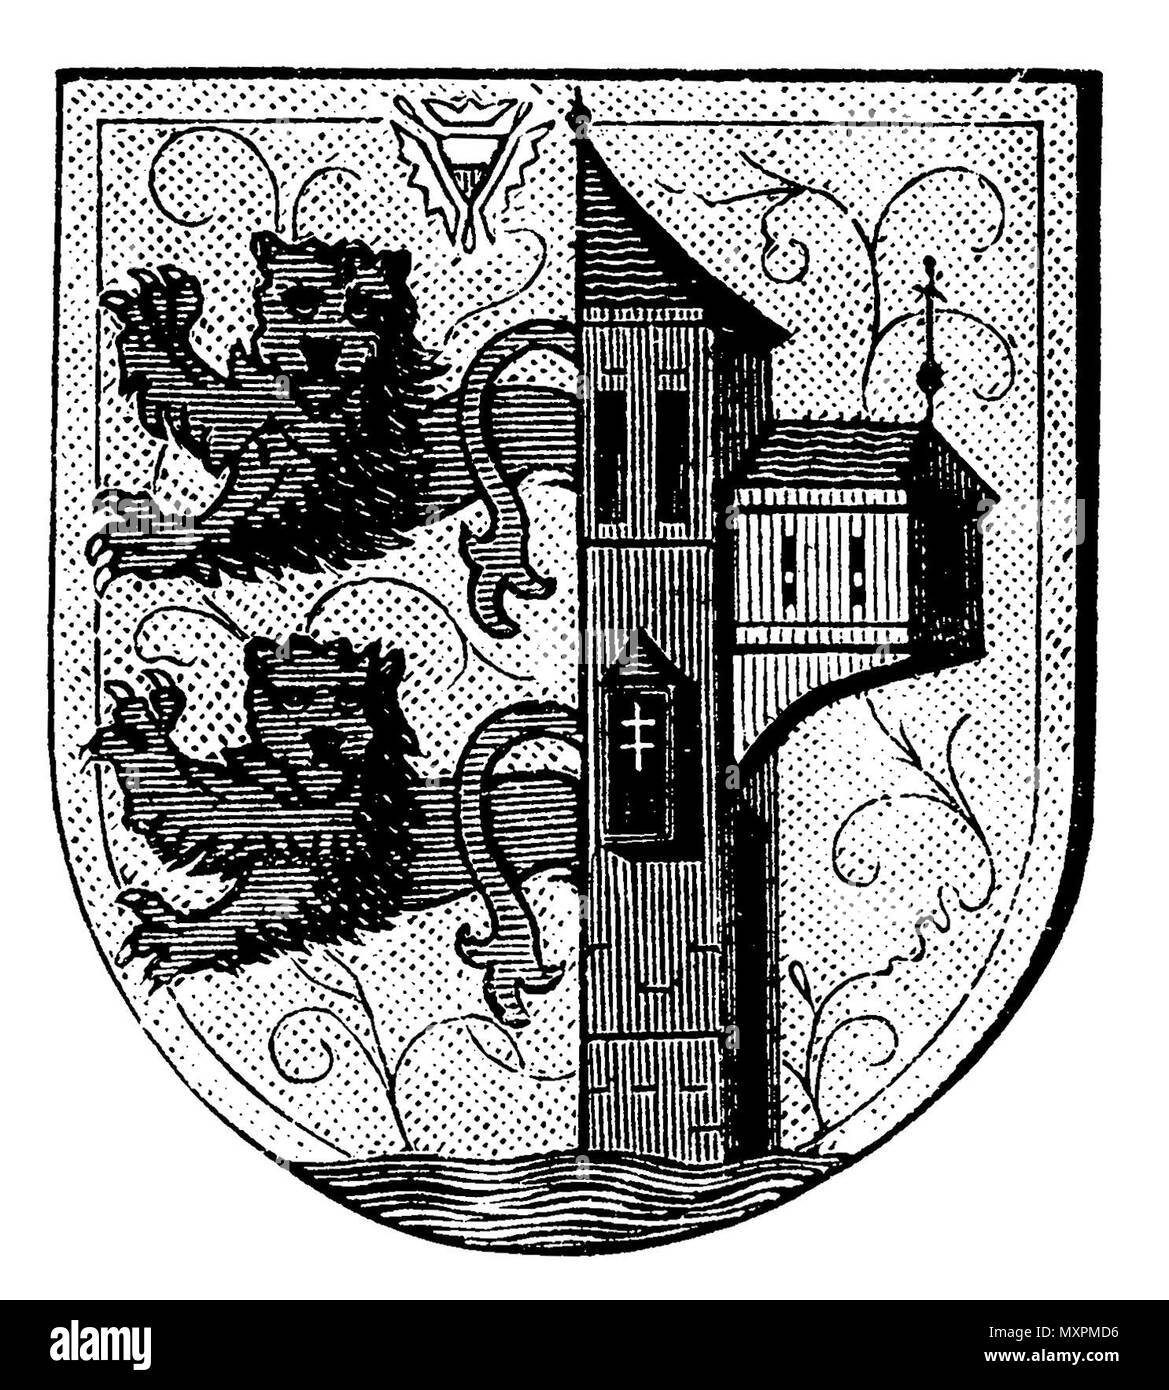 Coat of arms of Flensburg, Stock Photo